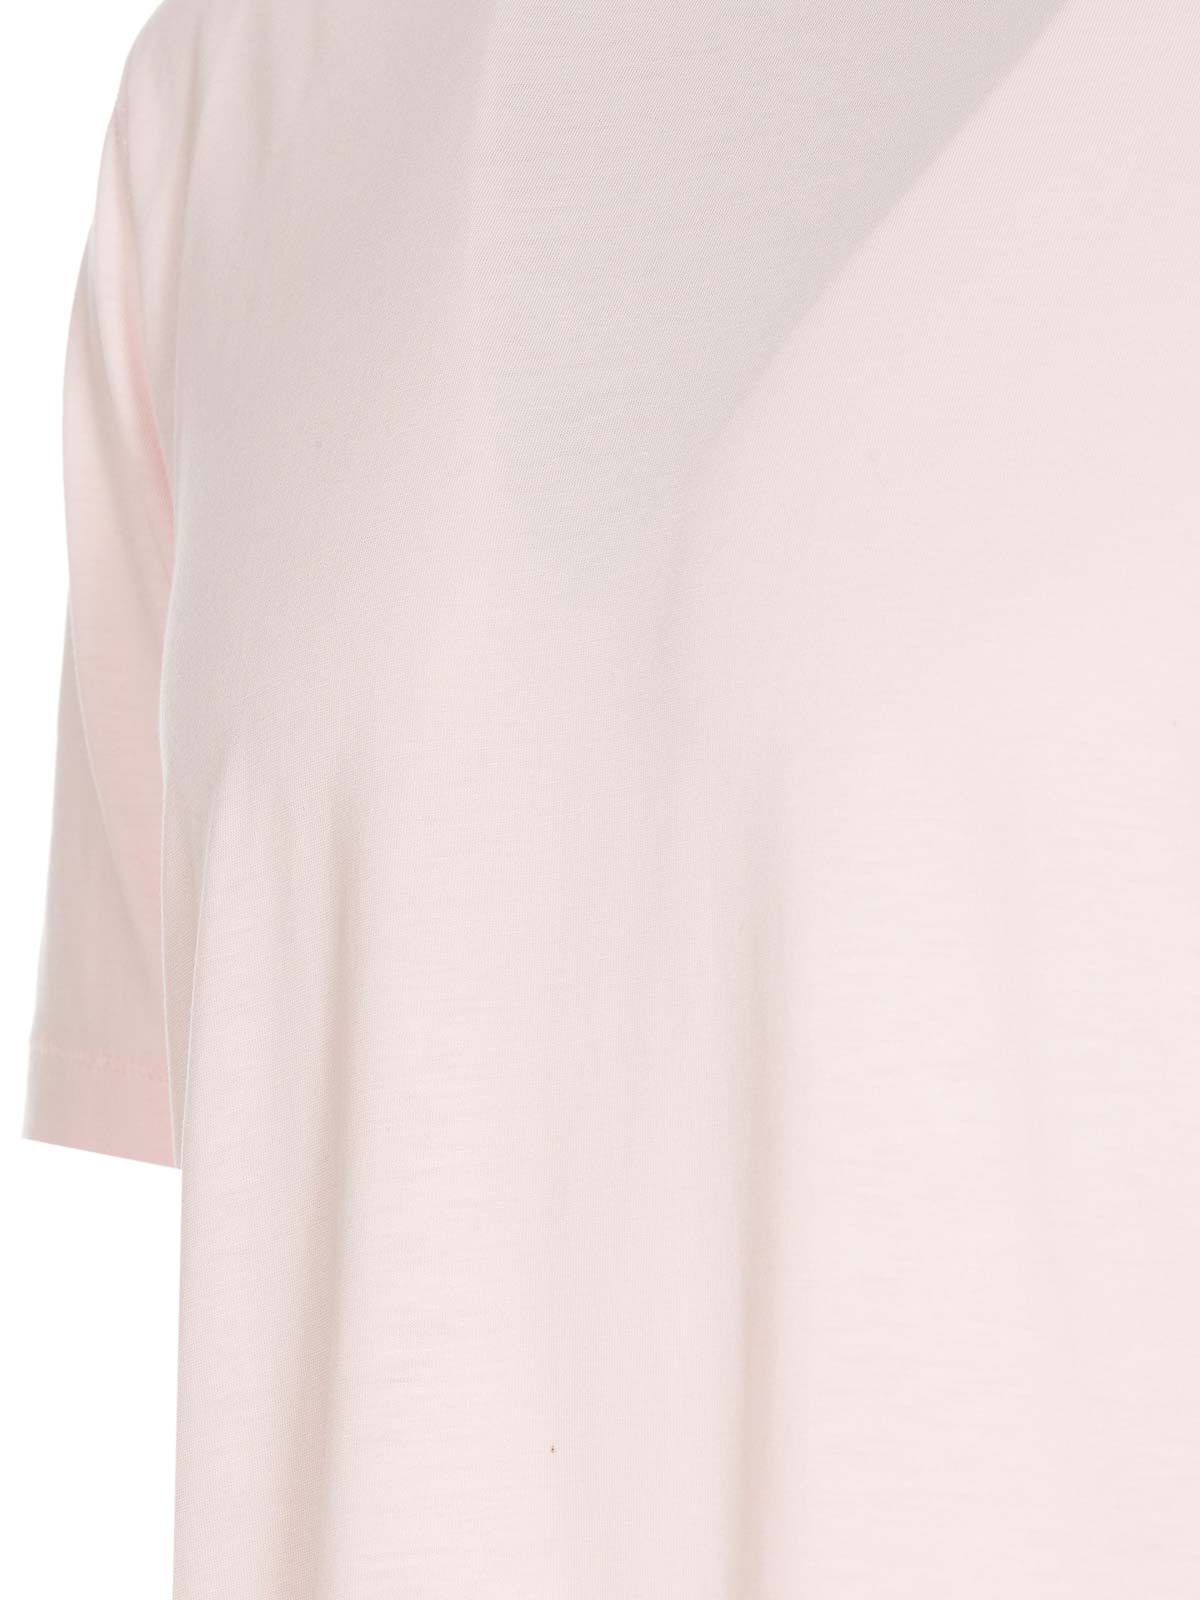 Shop Tom Ford Light Pink Tee Crewneck In Nude & Neutrals